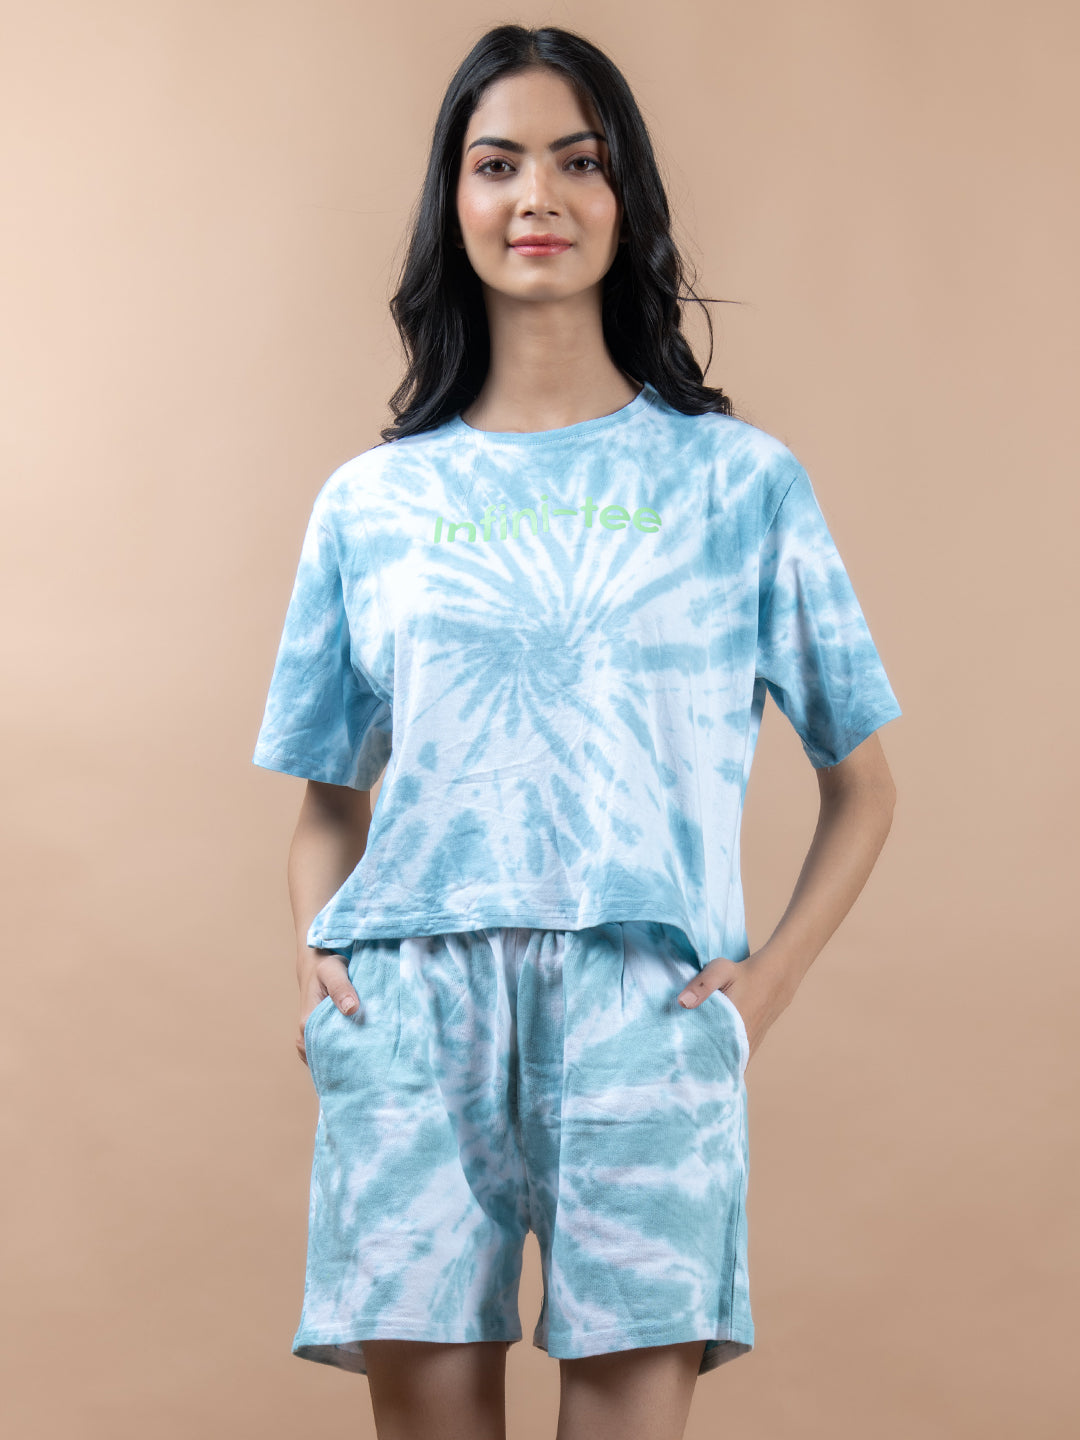 Faded Blue Color Infini-tee Printed Tie-Dye Cotton T-Shirt and Shorts Set For Women